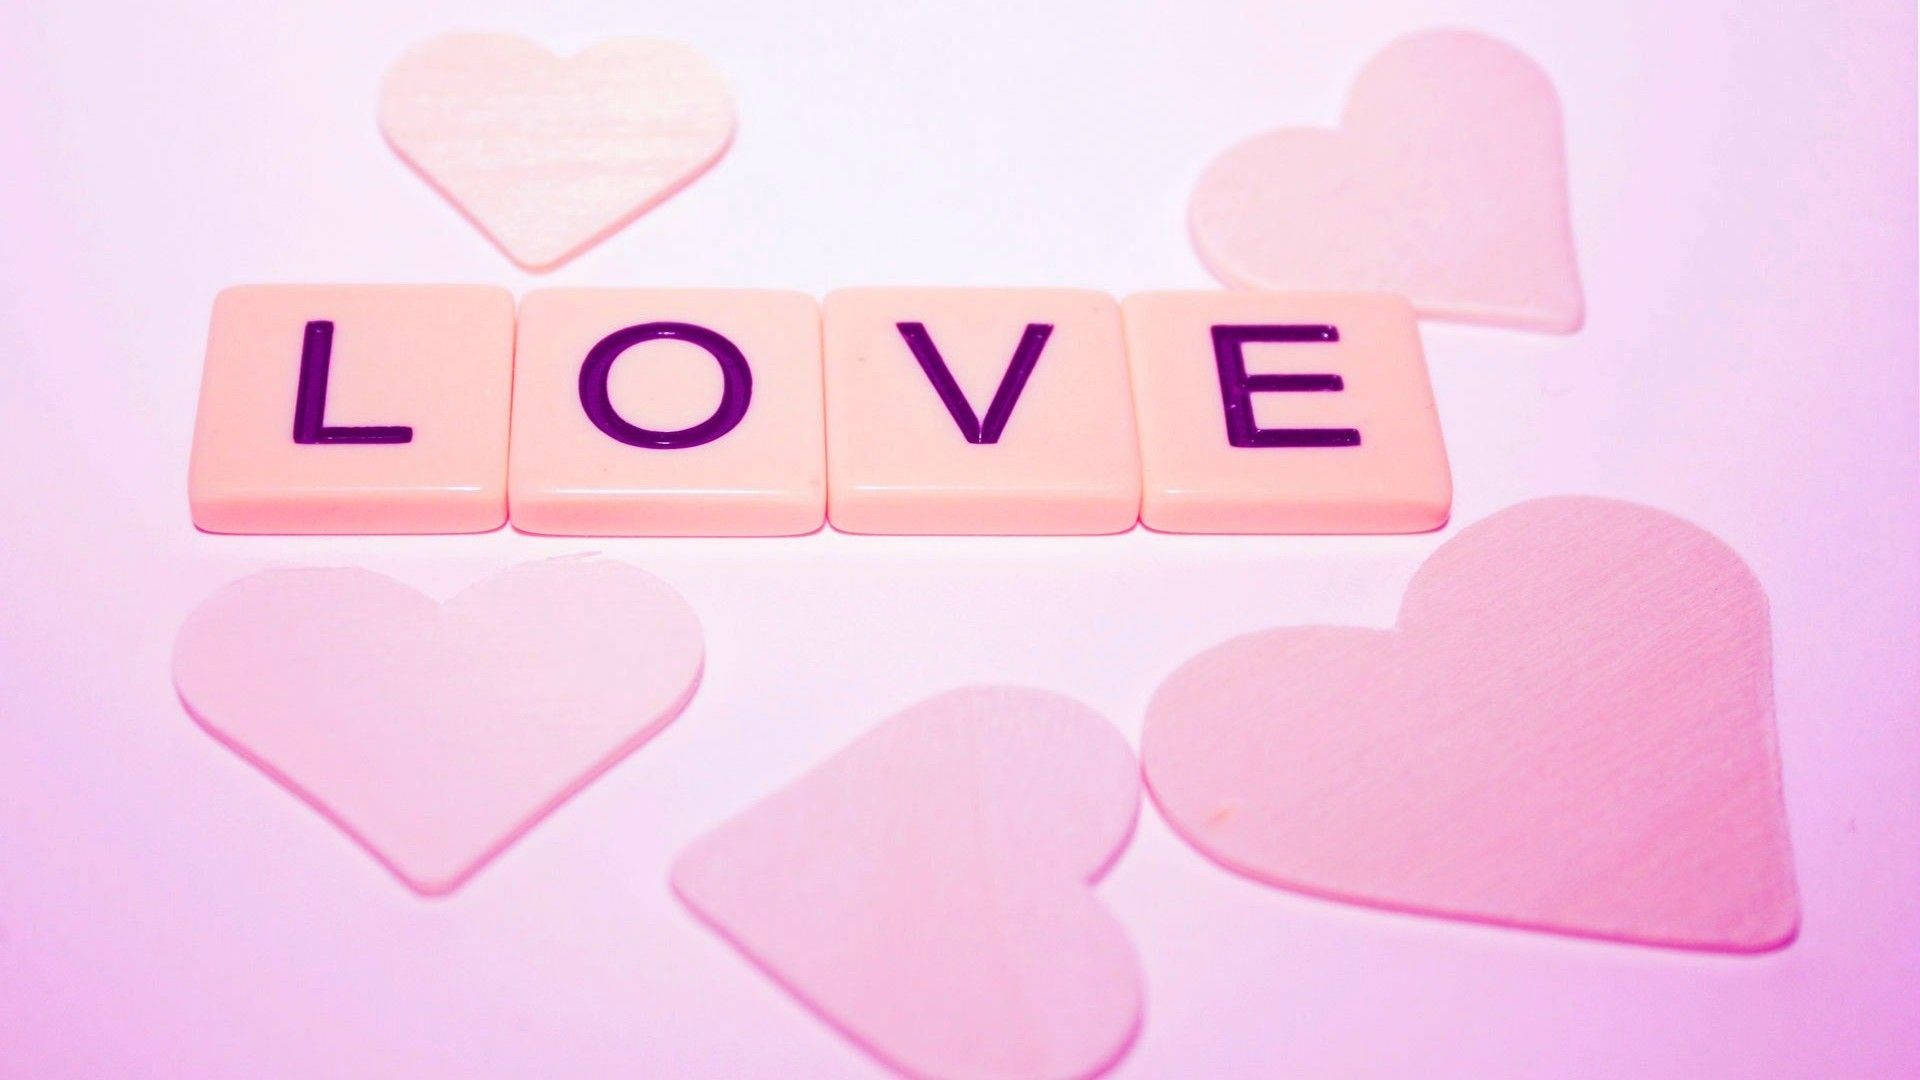 hd cute love wallpapers for mobile